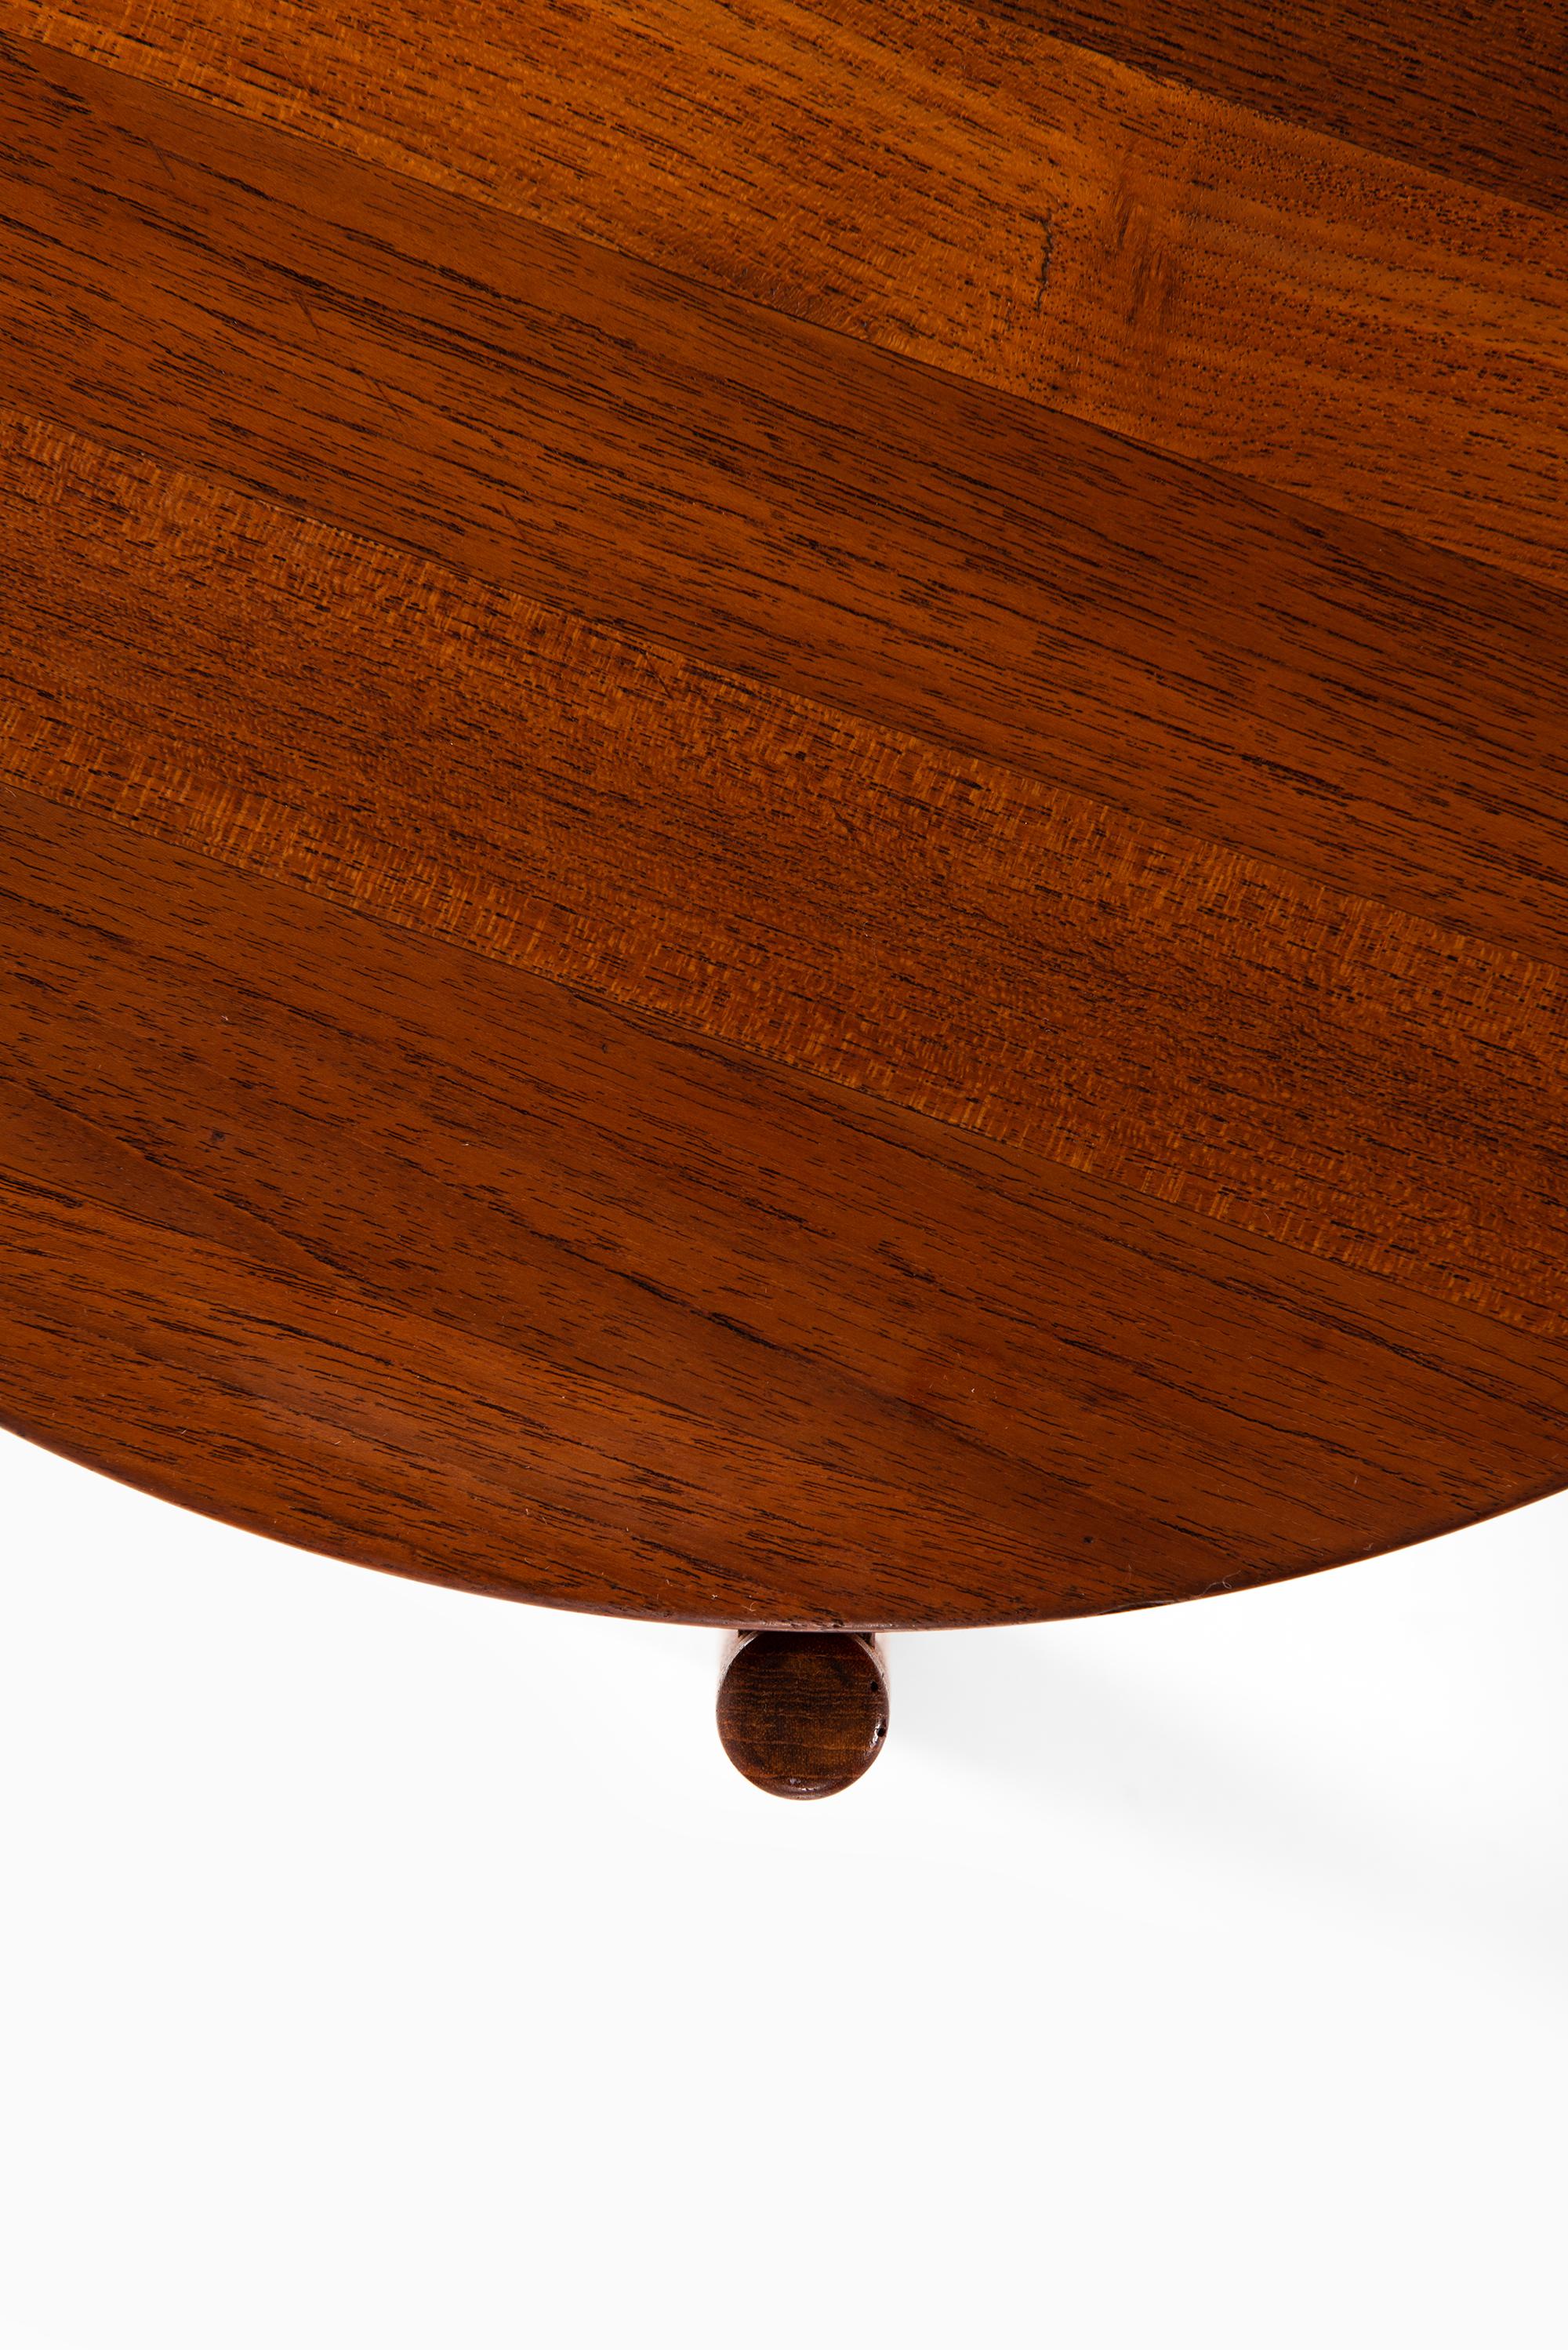 Mid-20th Century Jens Harald Quistgaard Side Table Produced by Nissen in Denmark